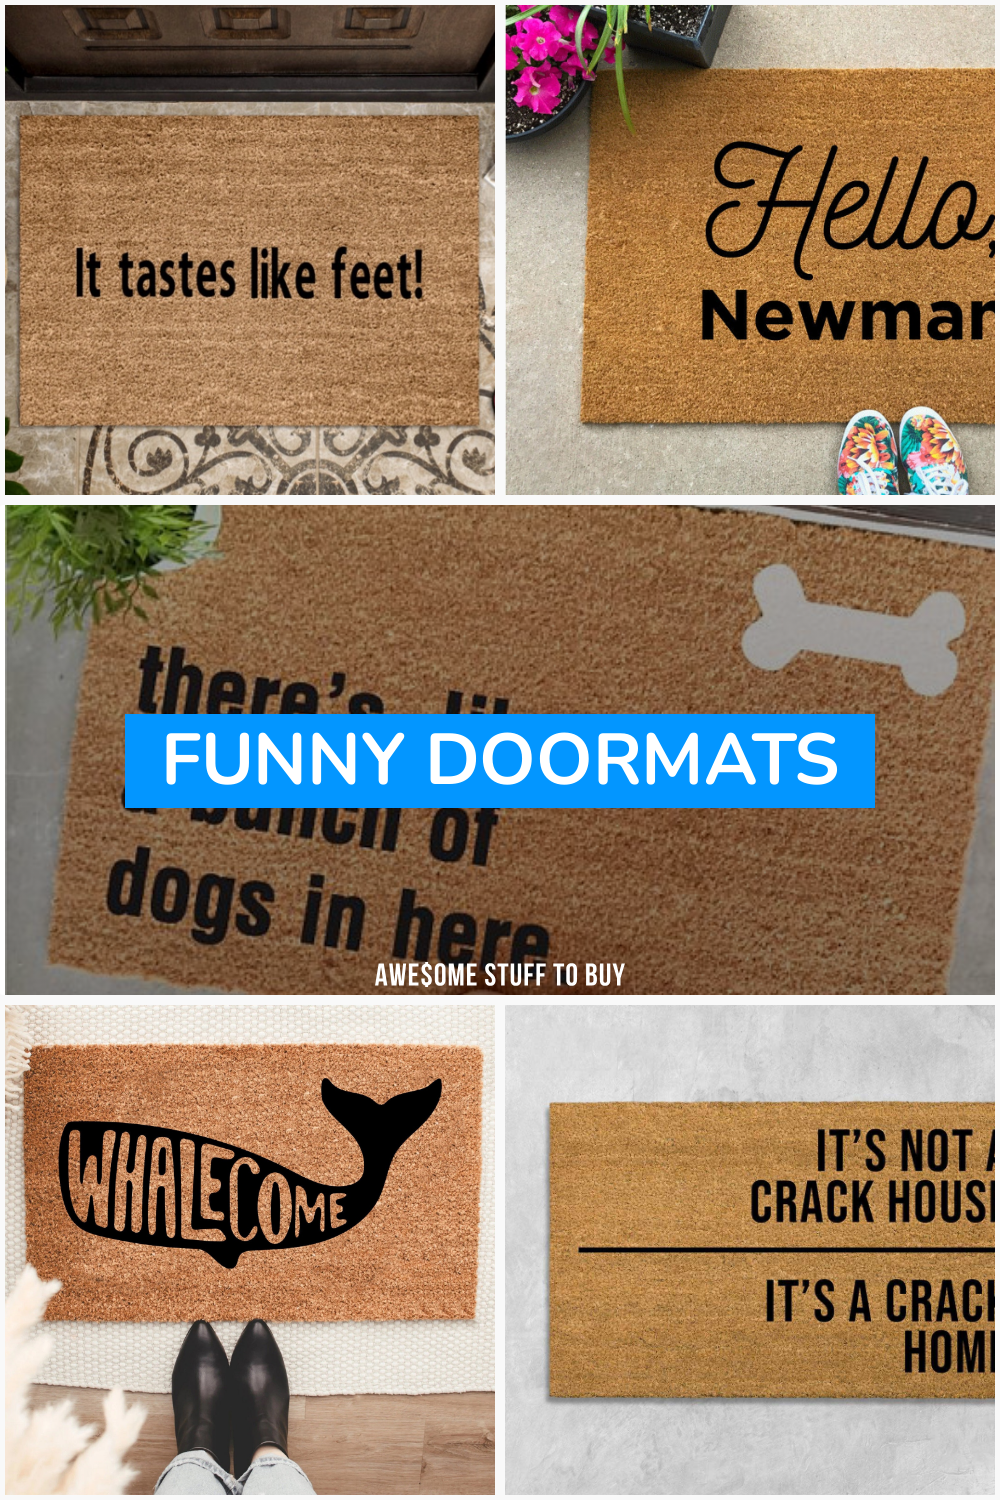 Funny Doormats // Awesome Stuff to Buy